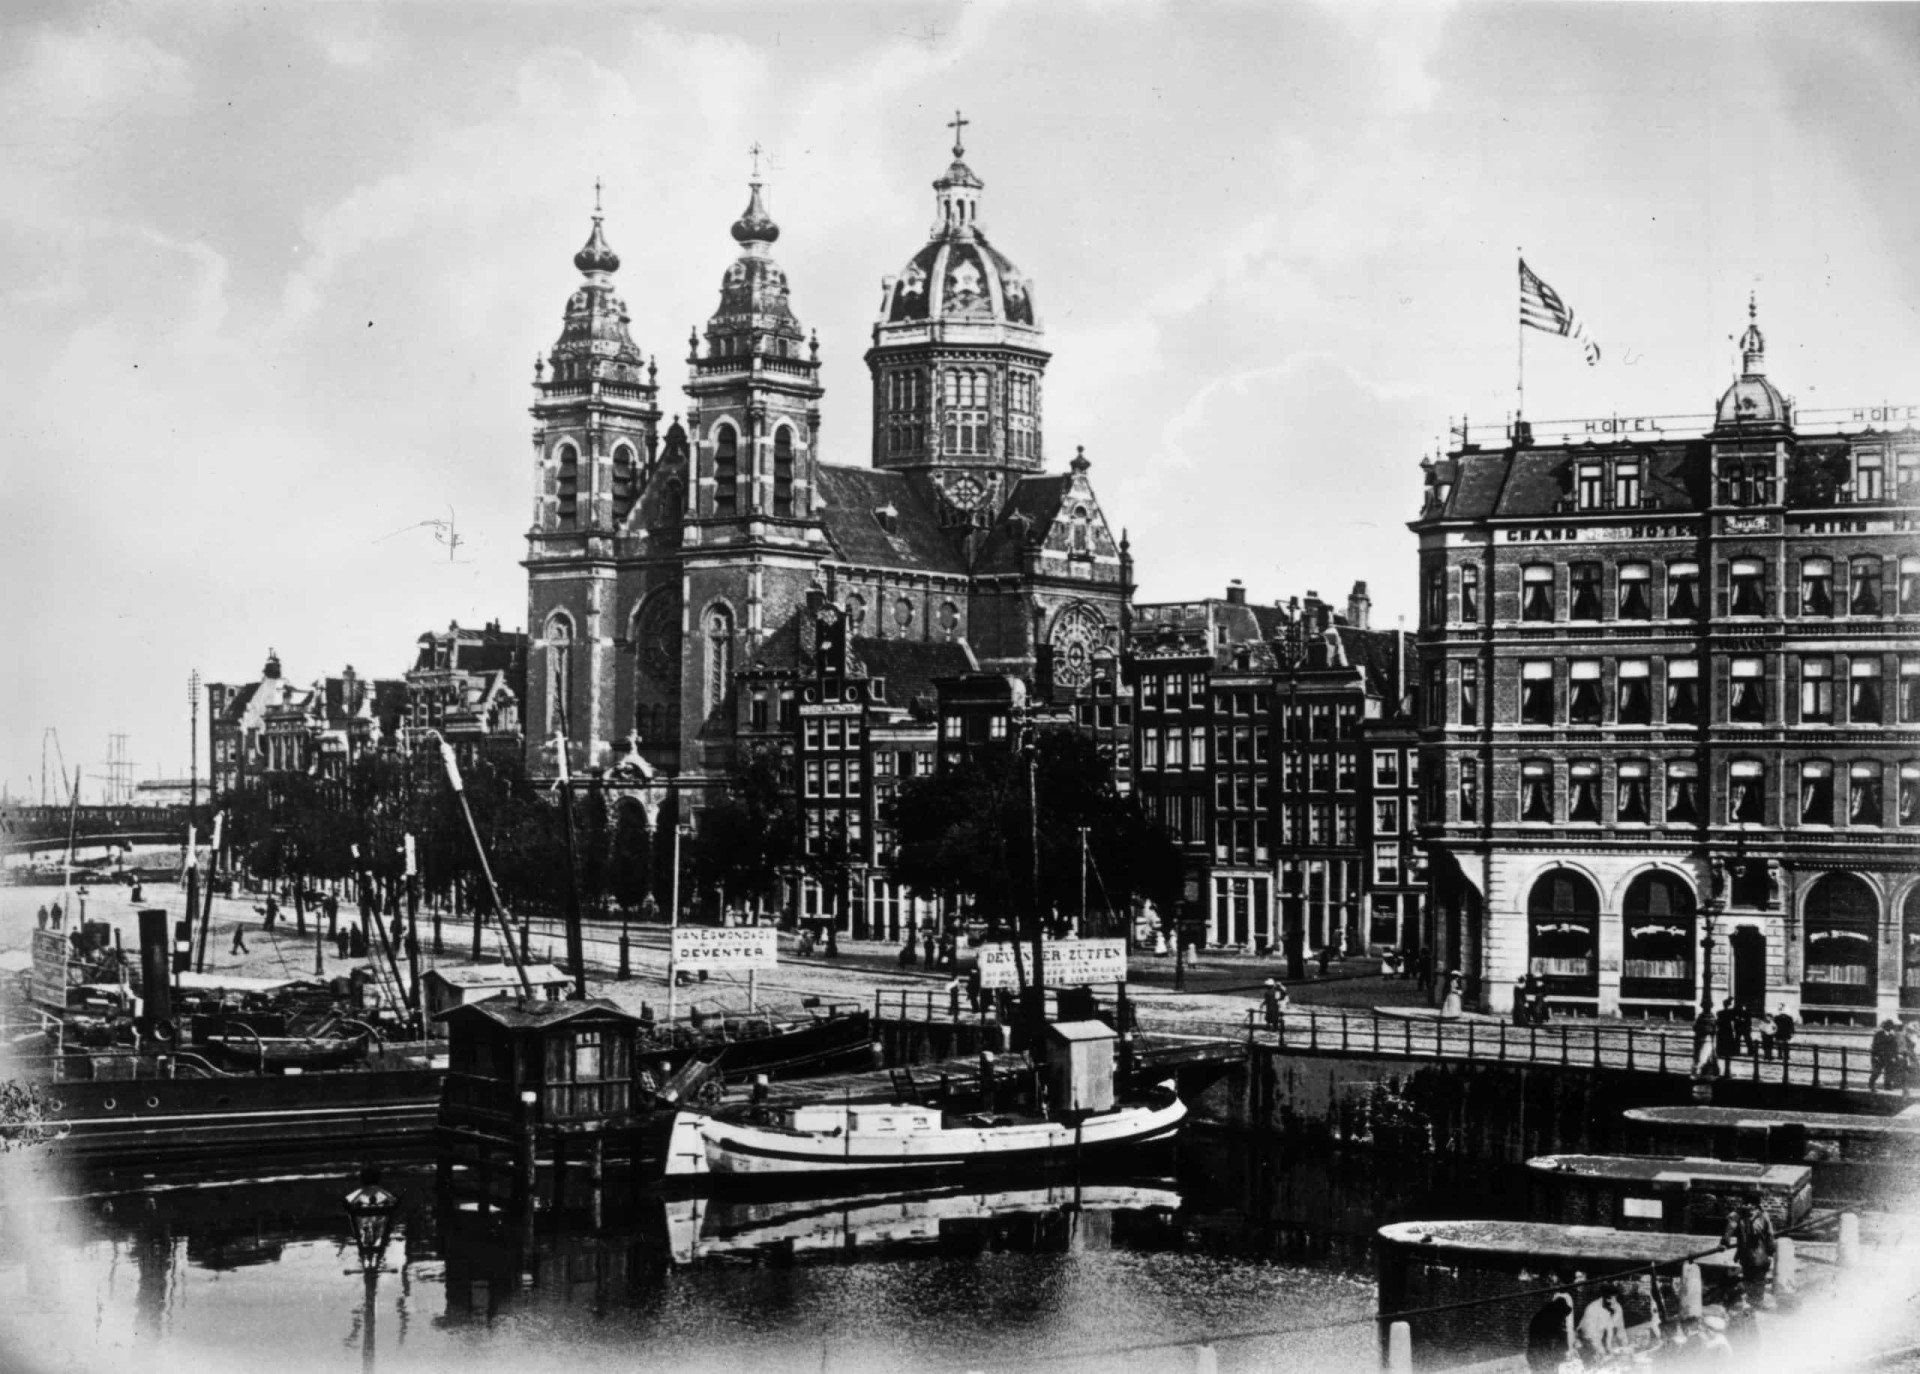 <p>This photo, taken in 1885, shows the church of St Nicholas in all its black-and-white glory.</p> <p>For something more modern, check out these amazing <a href="https://uk.starsinsider.com/lifestyle/239592/photos-you-wont-believe-were-taken-with-a-cell-phone">photos that were taken on a cell phone</a>. </p><p><a href="https://www.msn.com/en-us/community/channel/vid-7xx8mnucu55yw63we9va2gwr7uihbxwc68fxqp25x6tg4ftibpra?cvid=94631541bc0f4f89bfd59158d696ad7e">Follow us and access great exclusive content every day</a></p>